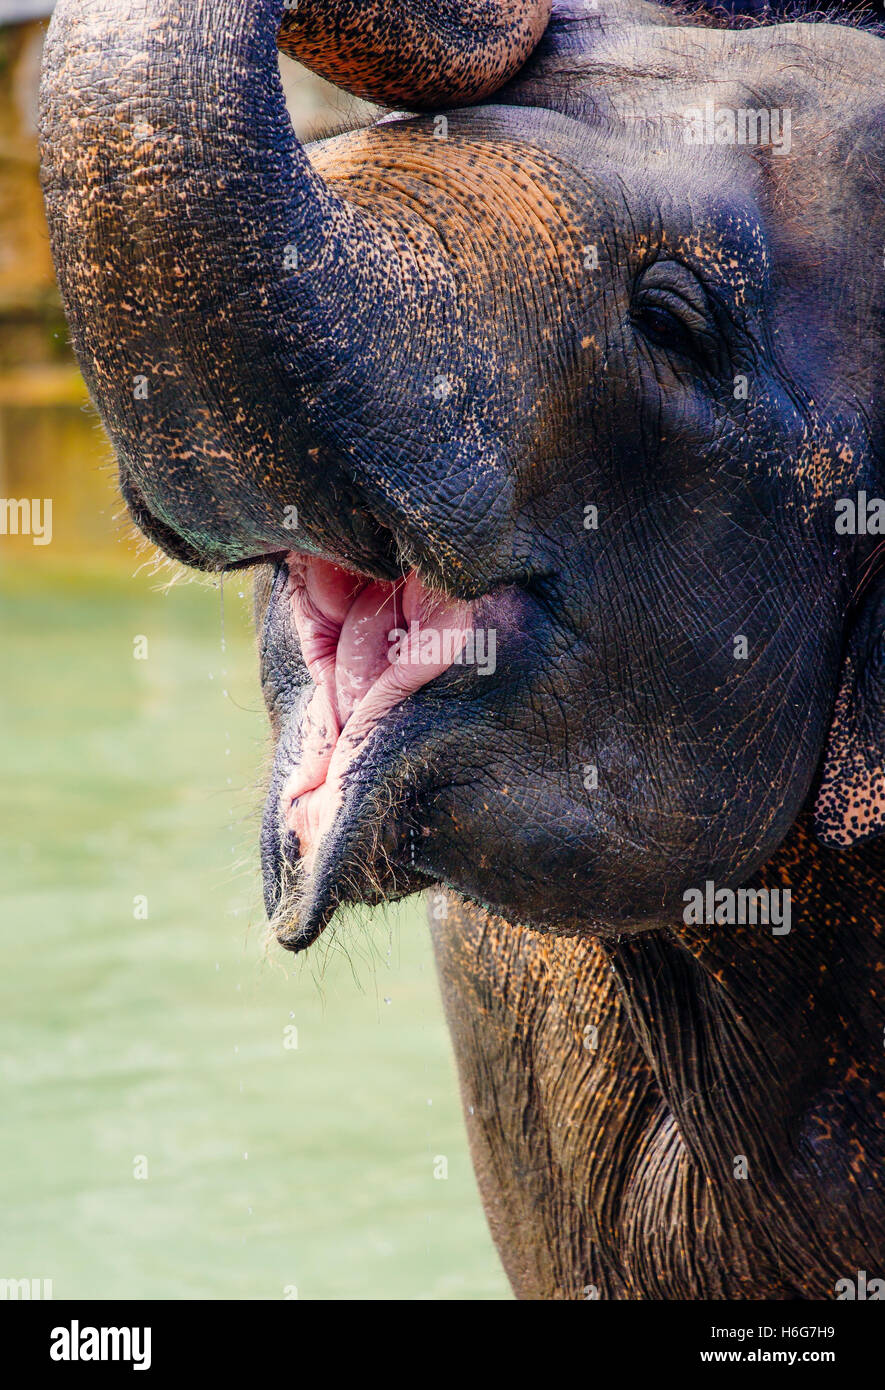 An Asian elephant trumpeting with water in the background. Stock Photo